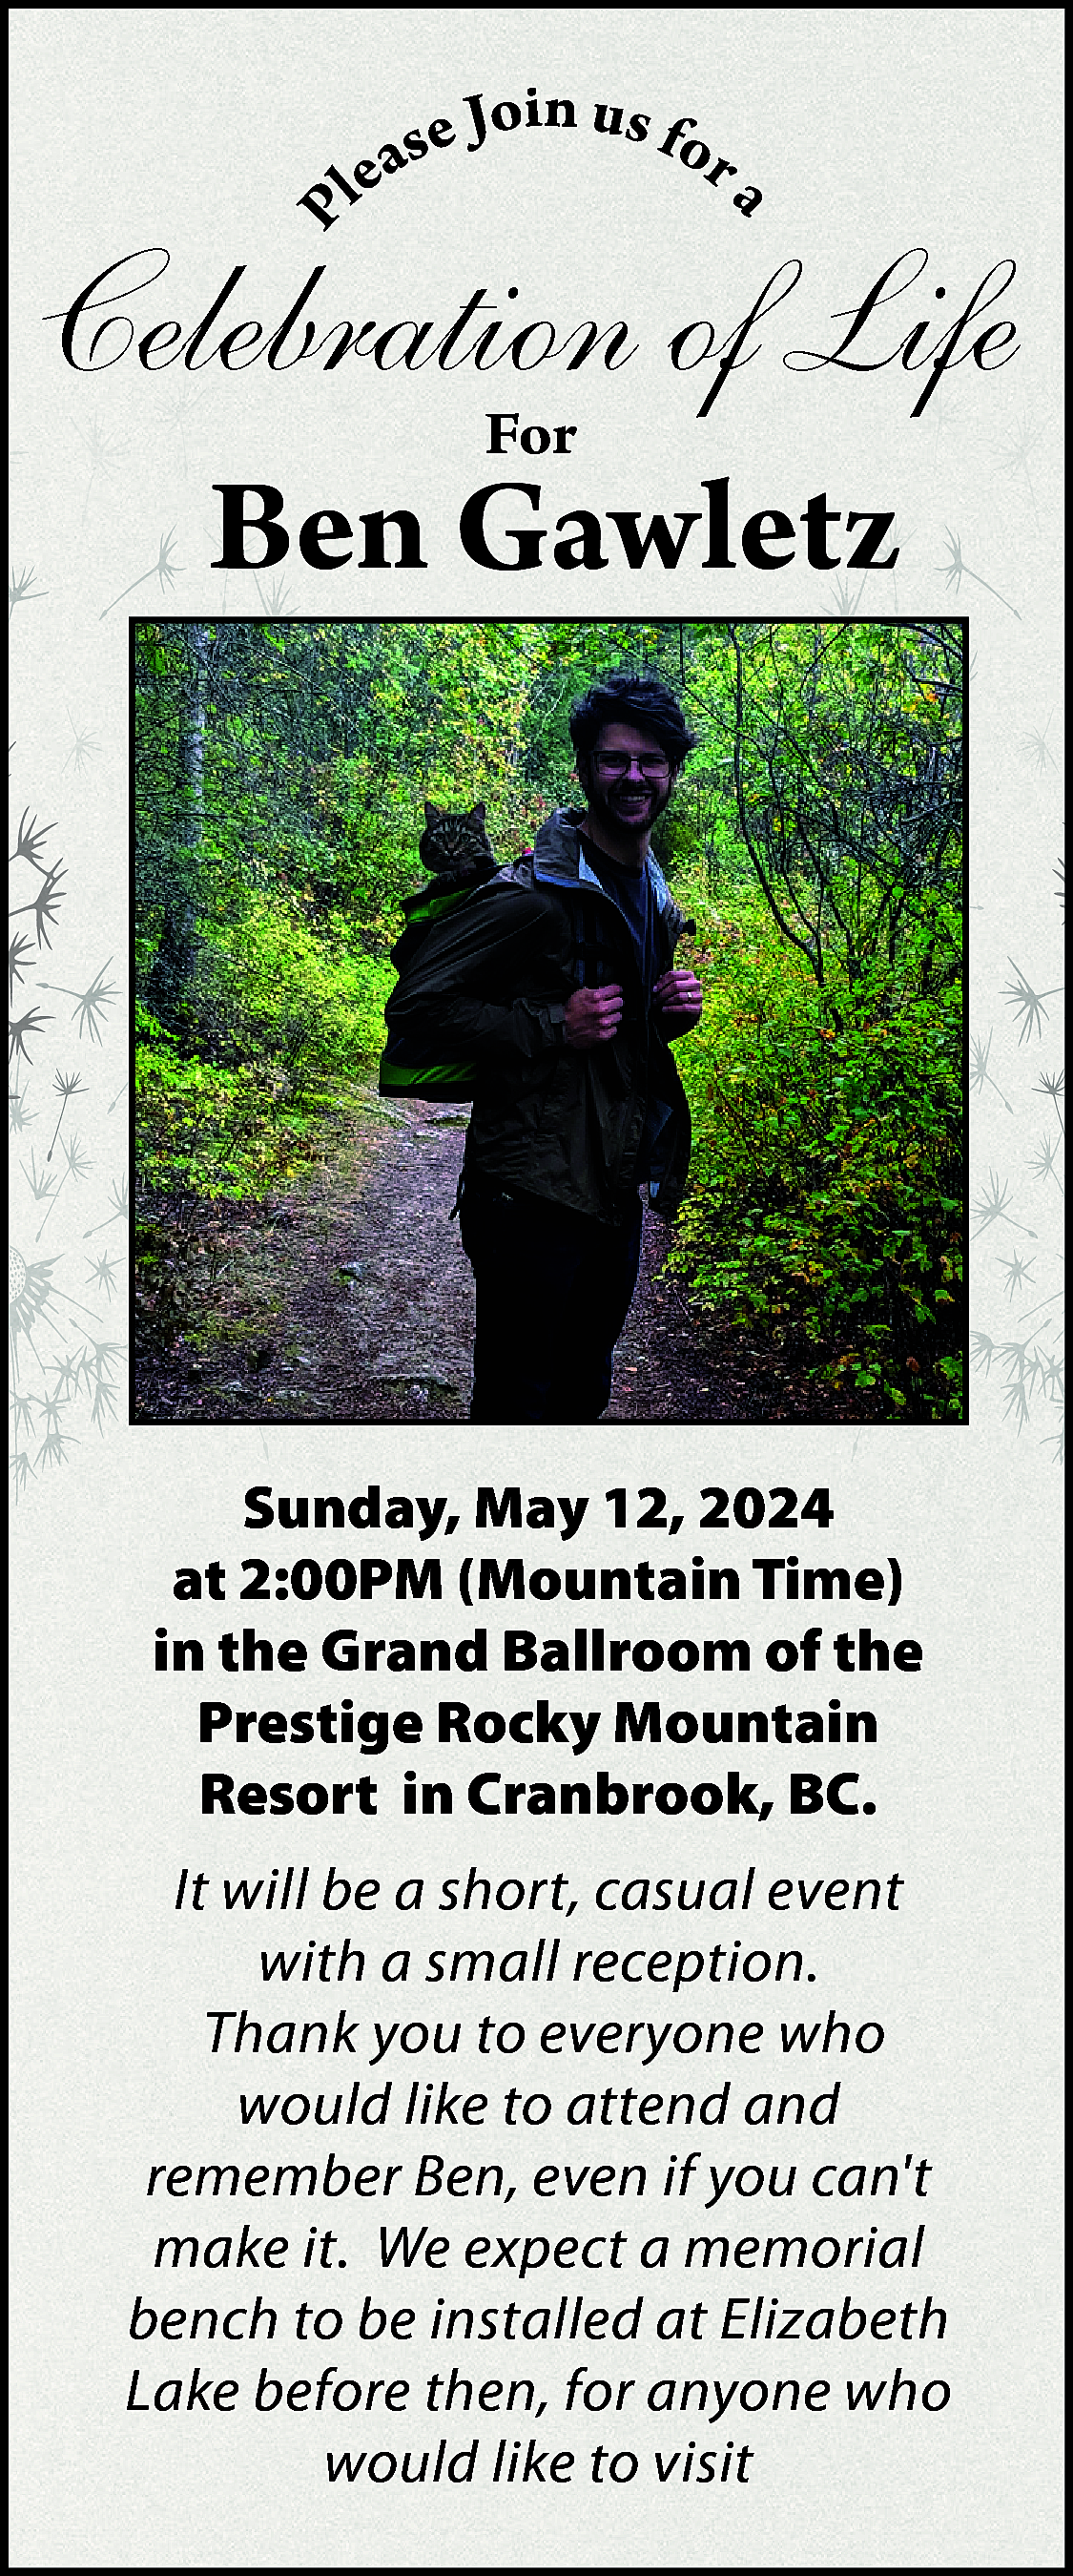 P <br> <br>a <br> <br>in  P    a    in u  se Jo s for  lea    Celebration of Life  For    Ben Gawletz    Sunday, May 12, 2024  at 2:00PM (Mountain Time)  in the Grand Ballroom of the  Prestige Rocky Mountain  Resort in Cranbrook, BC.  It will be a short, casual event  with a small reception.  Thank you to everyone who  would like to attend and  remember Ben, even if you cant  make it. We expect a memorial  bench to be installed at Elizabeth  Lake before then, for anyone who  would like to visit    